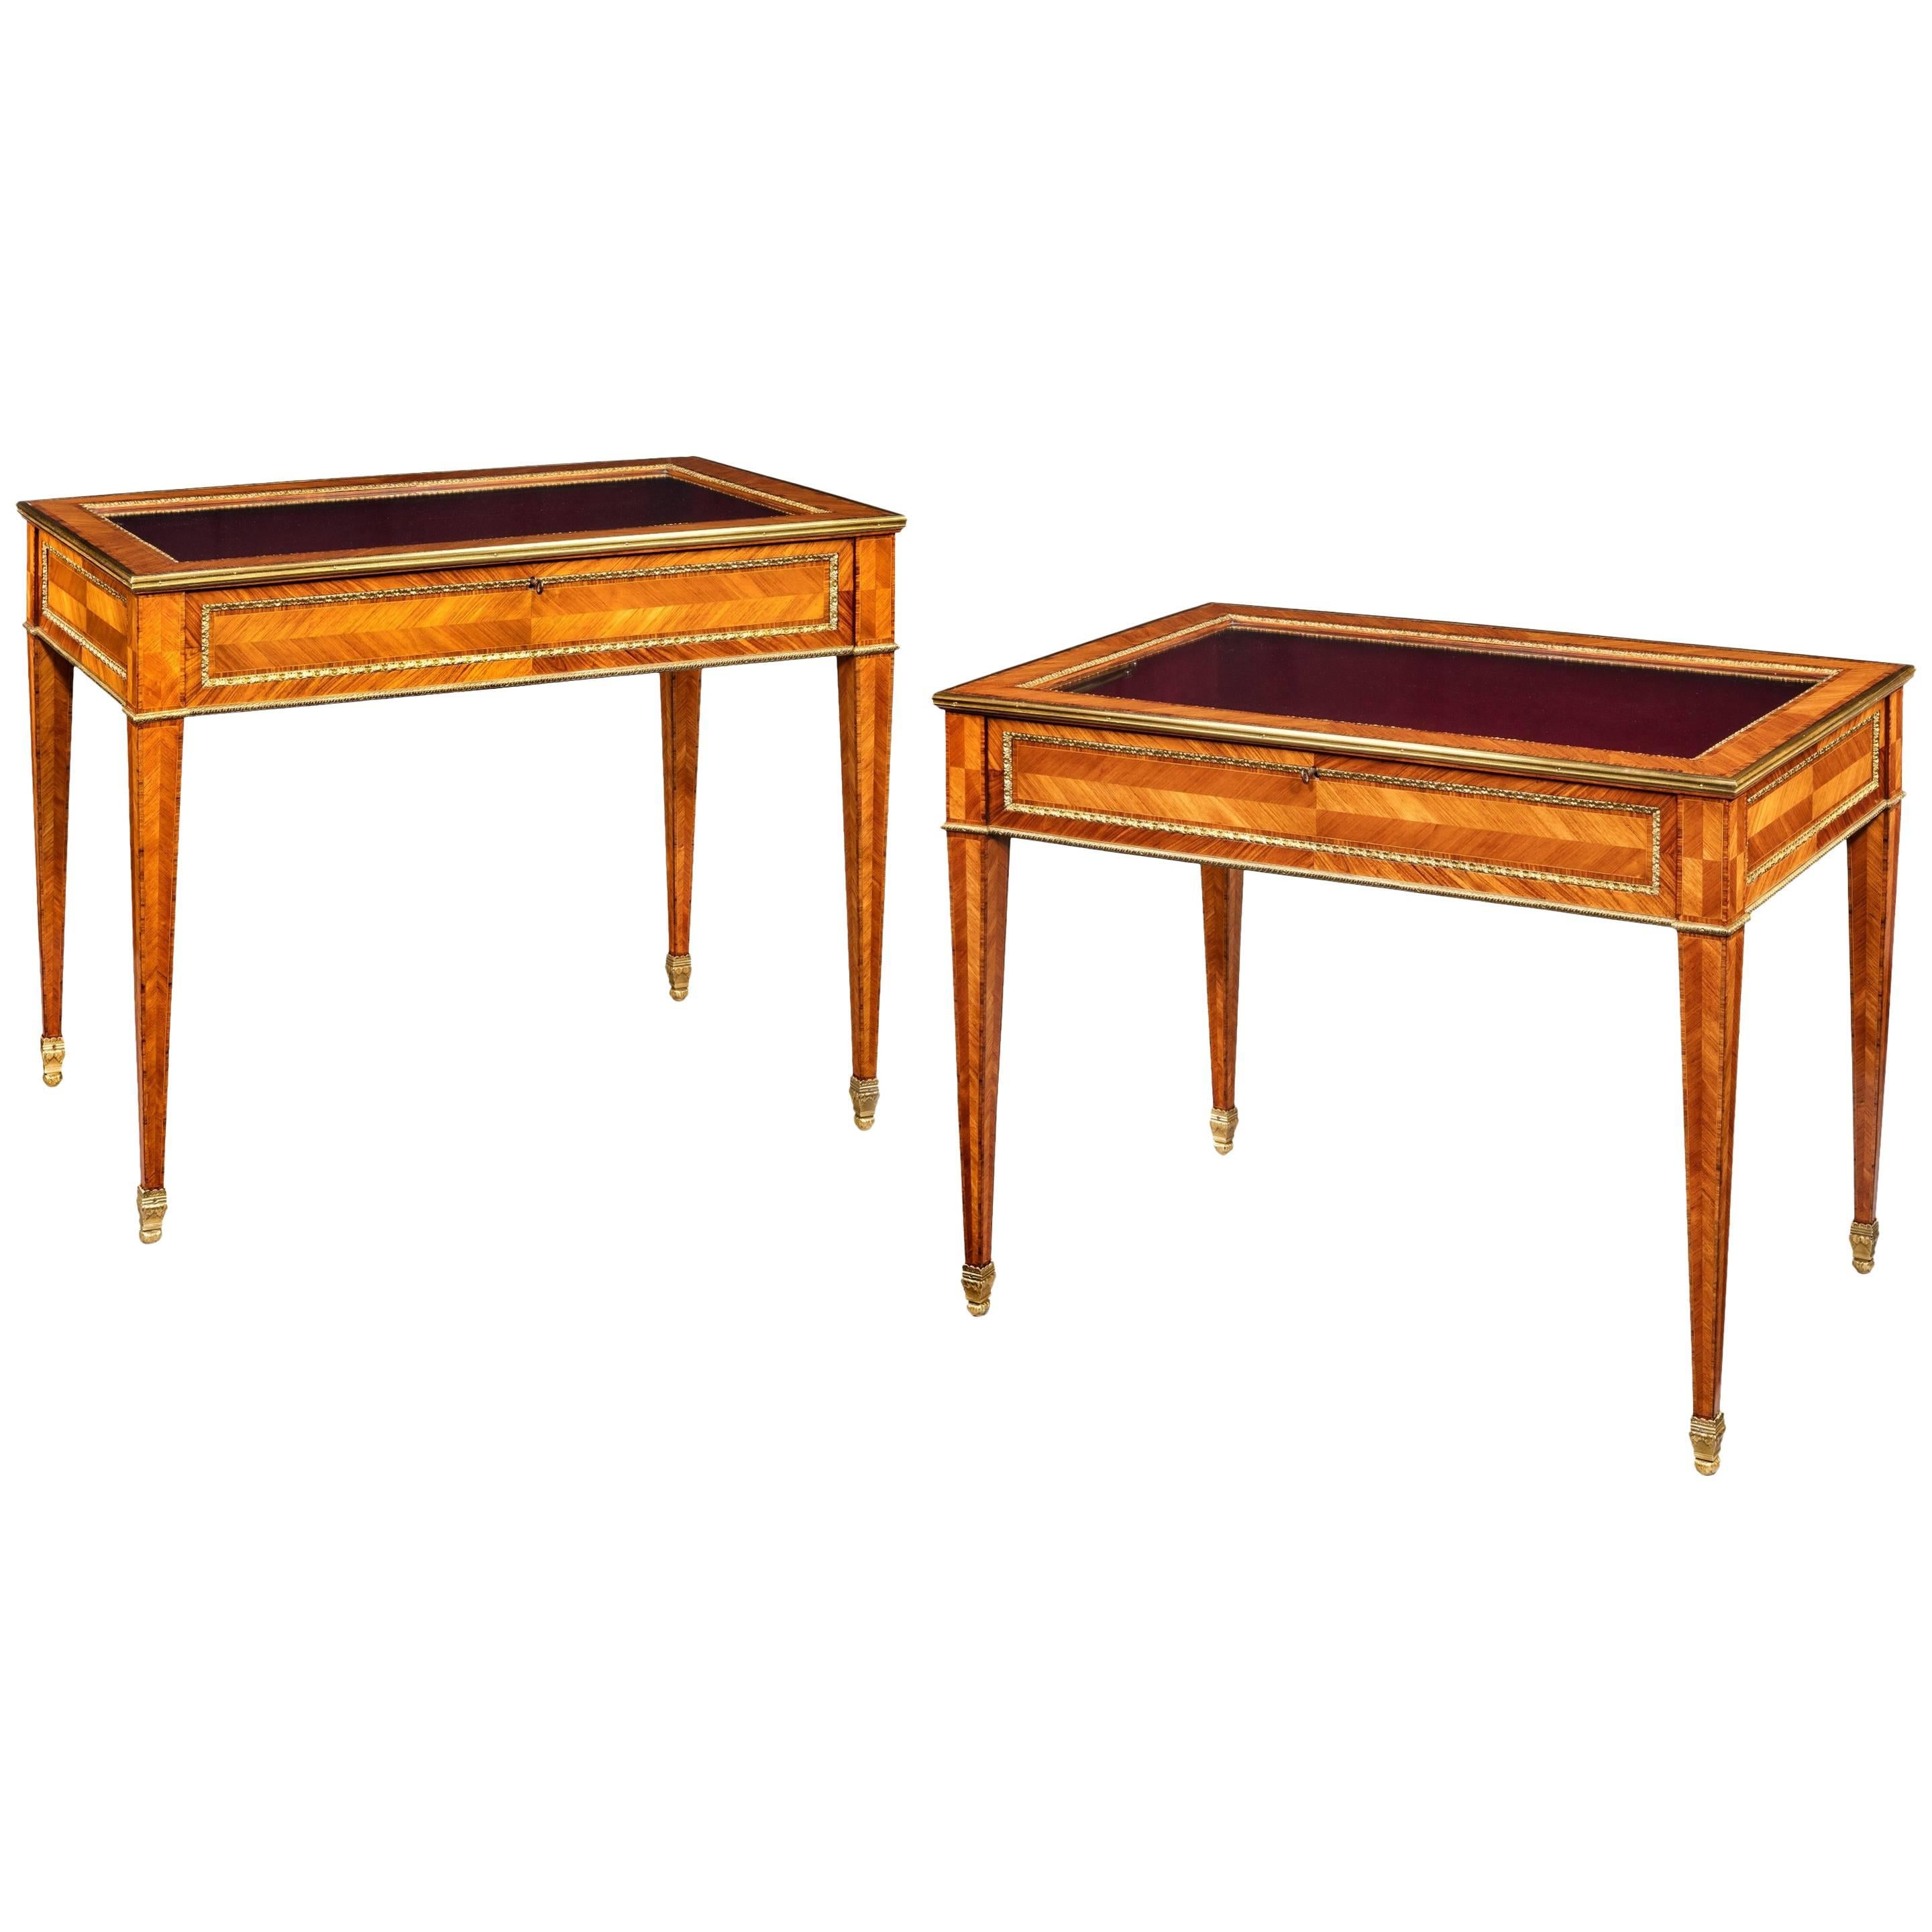 Pair of English Kingwood Display Tables in the French Taste